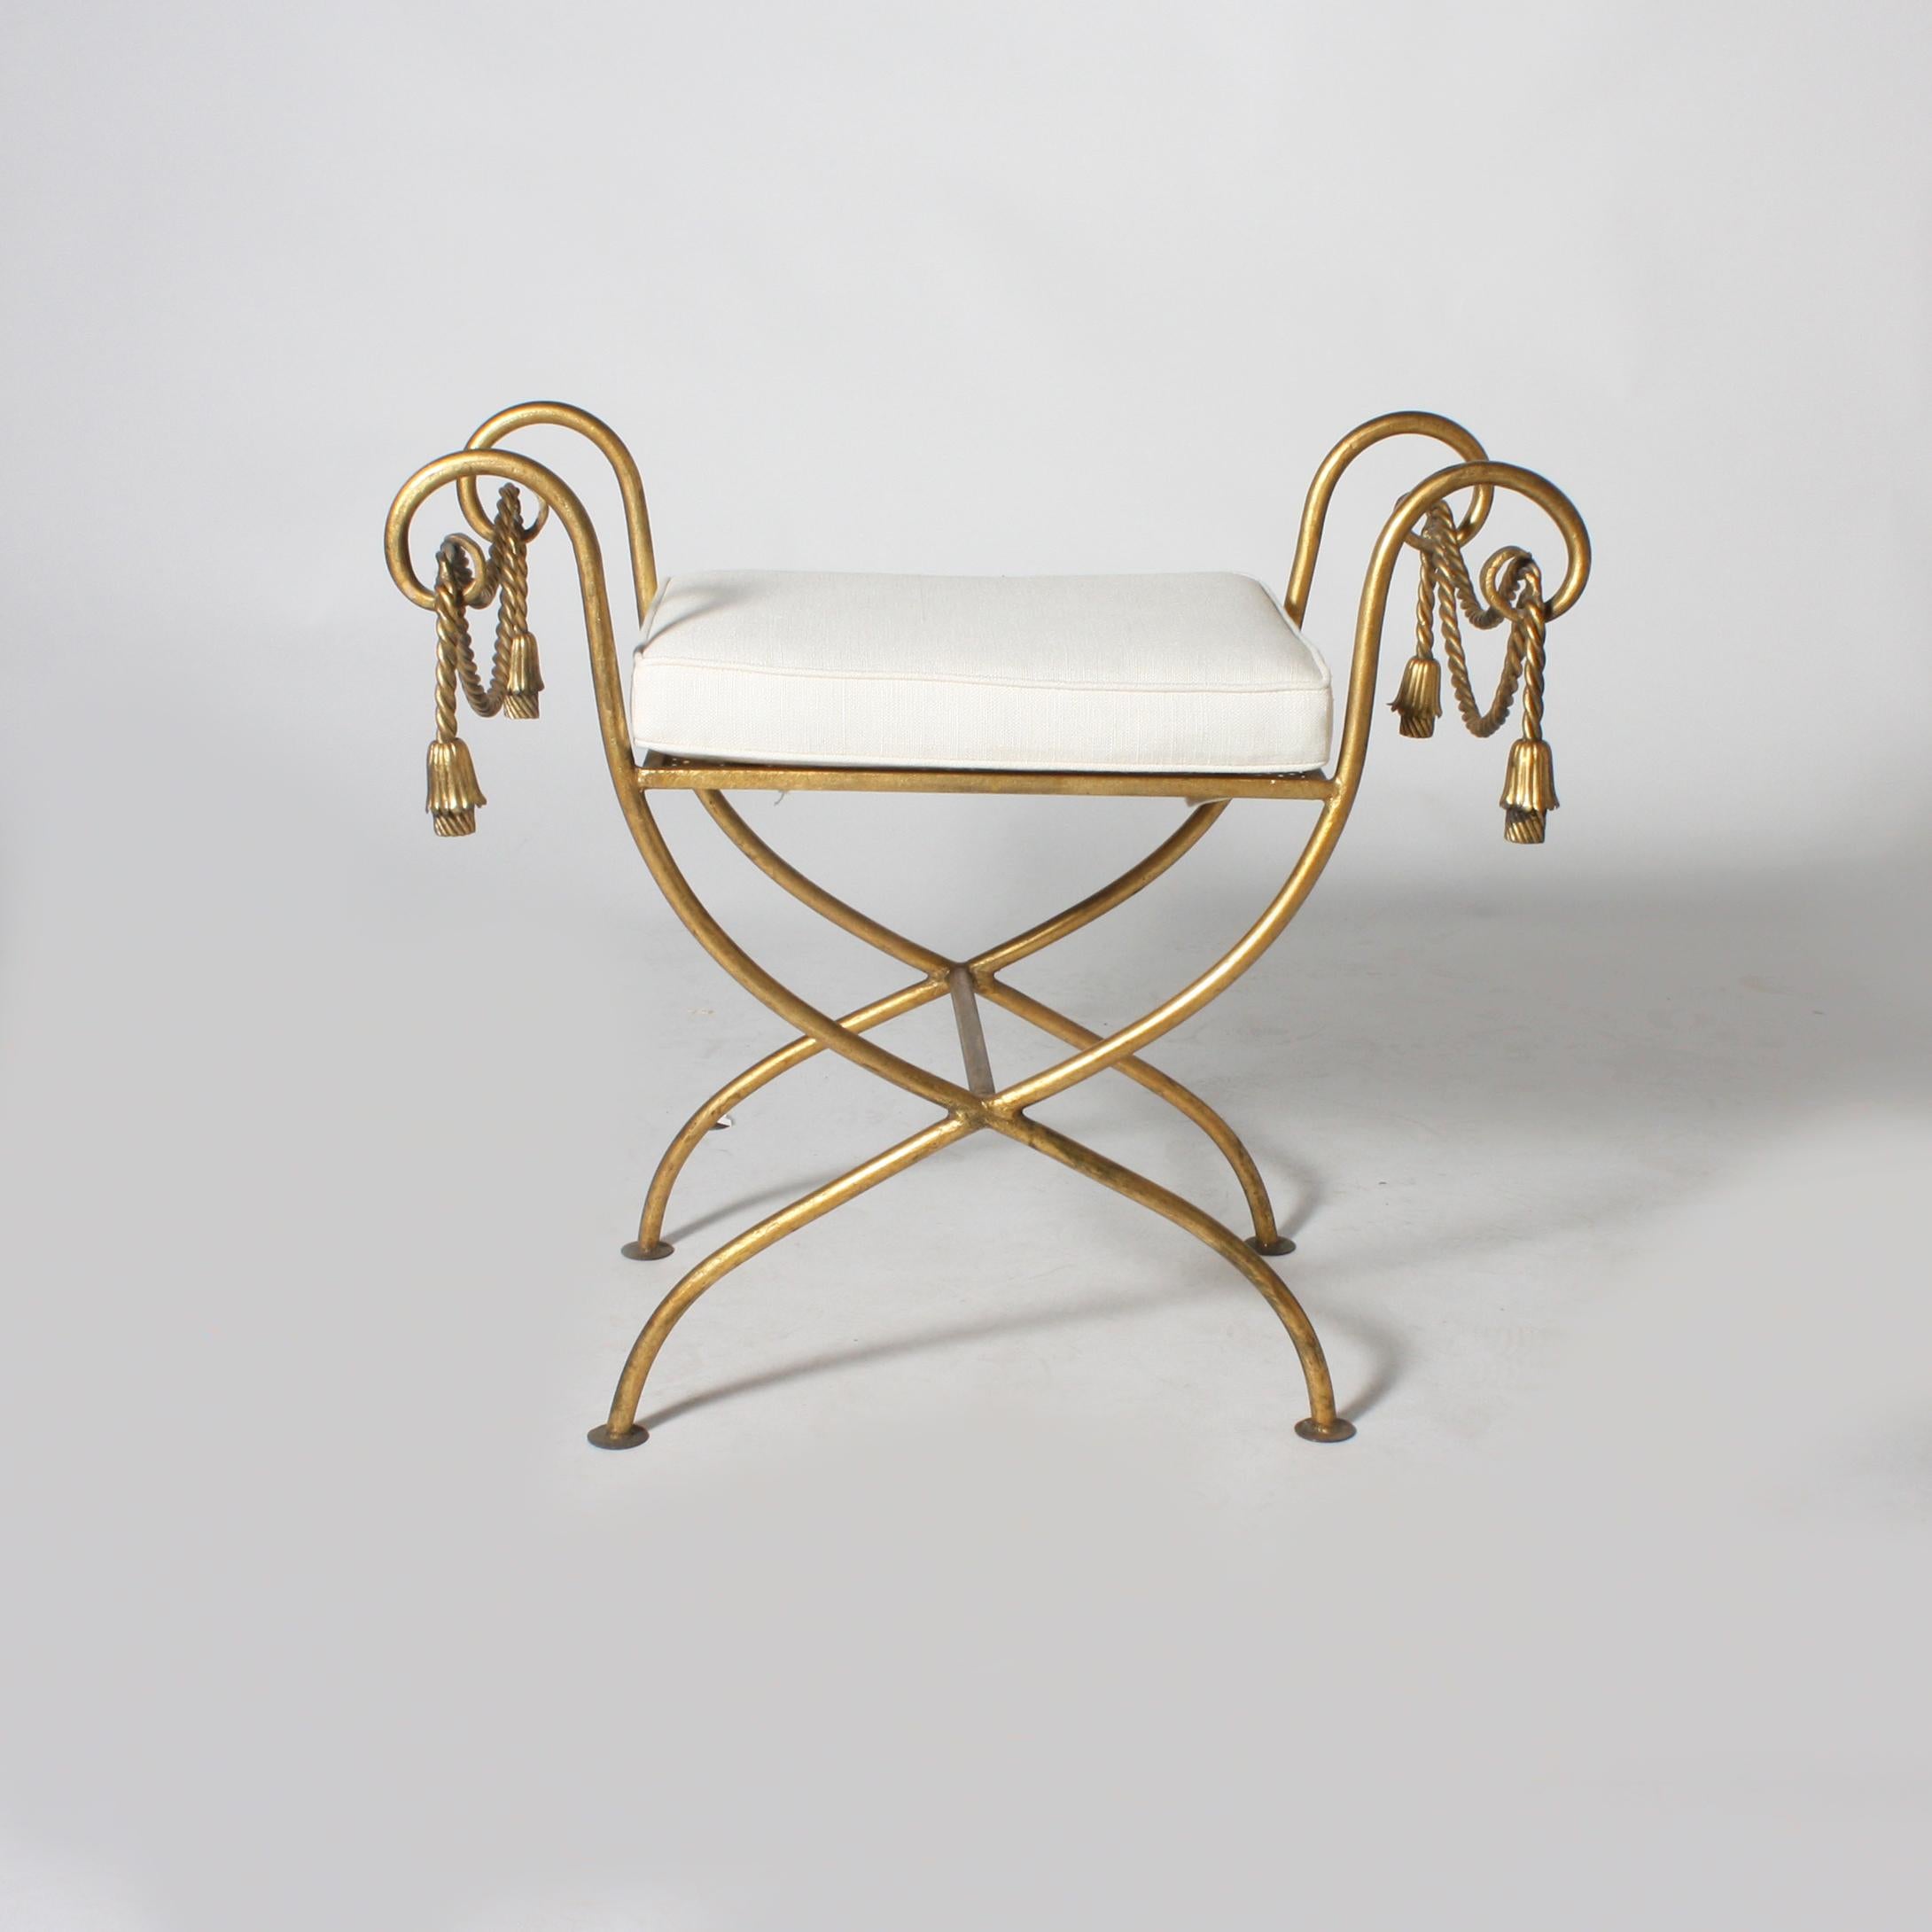 Mid-20th Century French Gilded Iron Dressing Bench, circa 1950